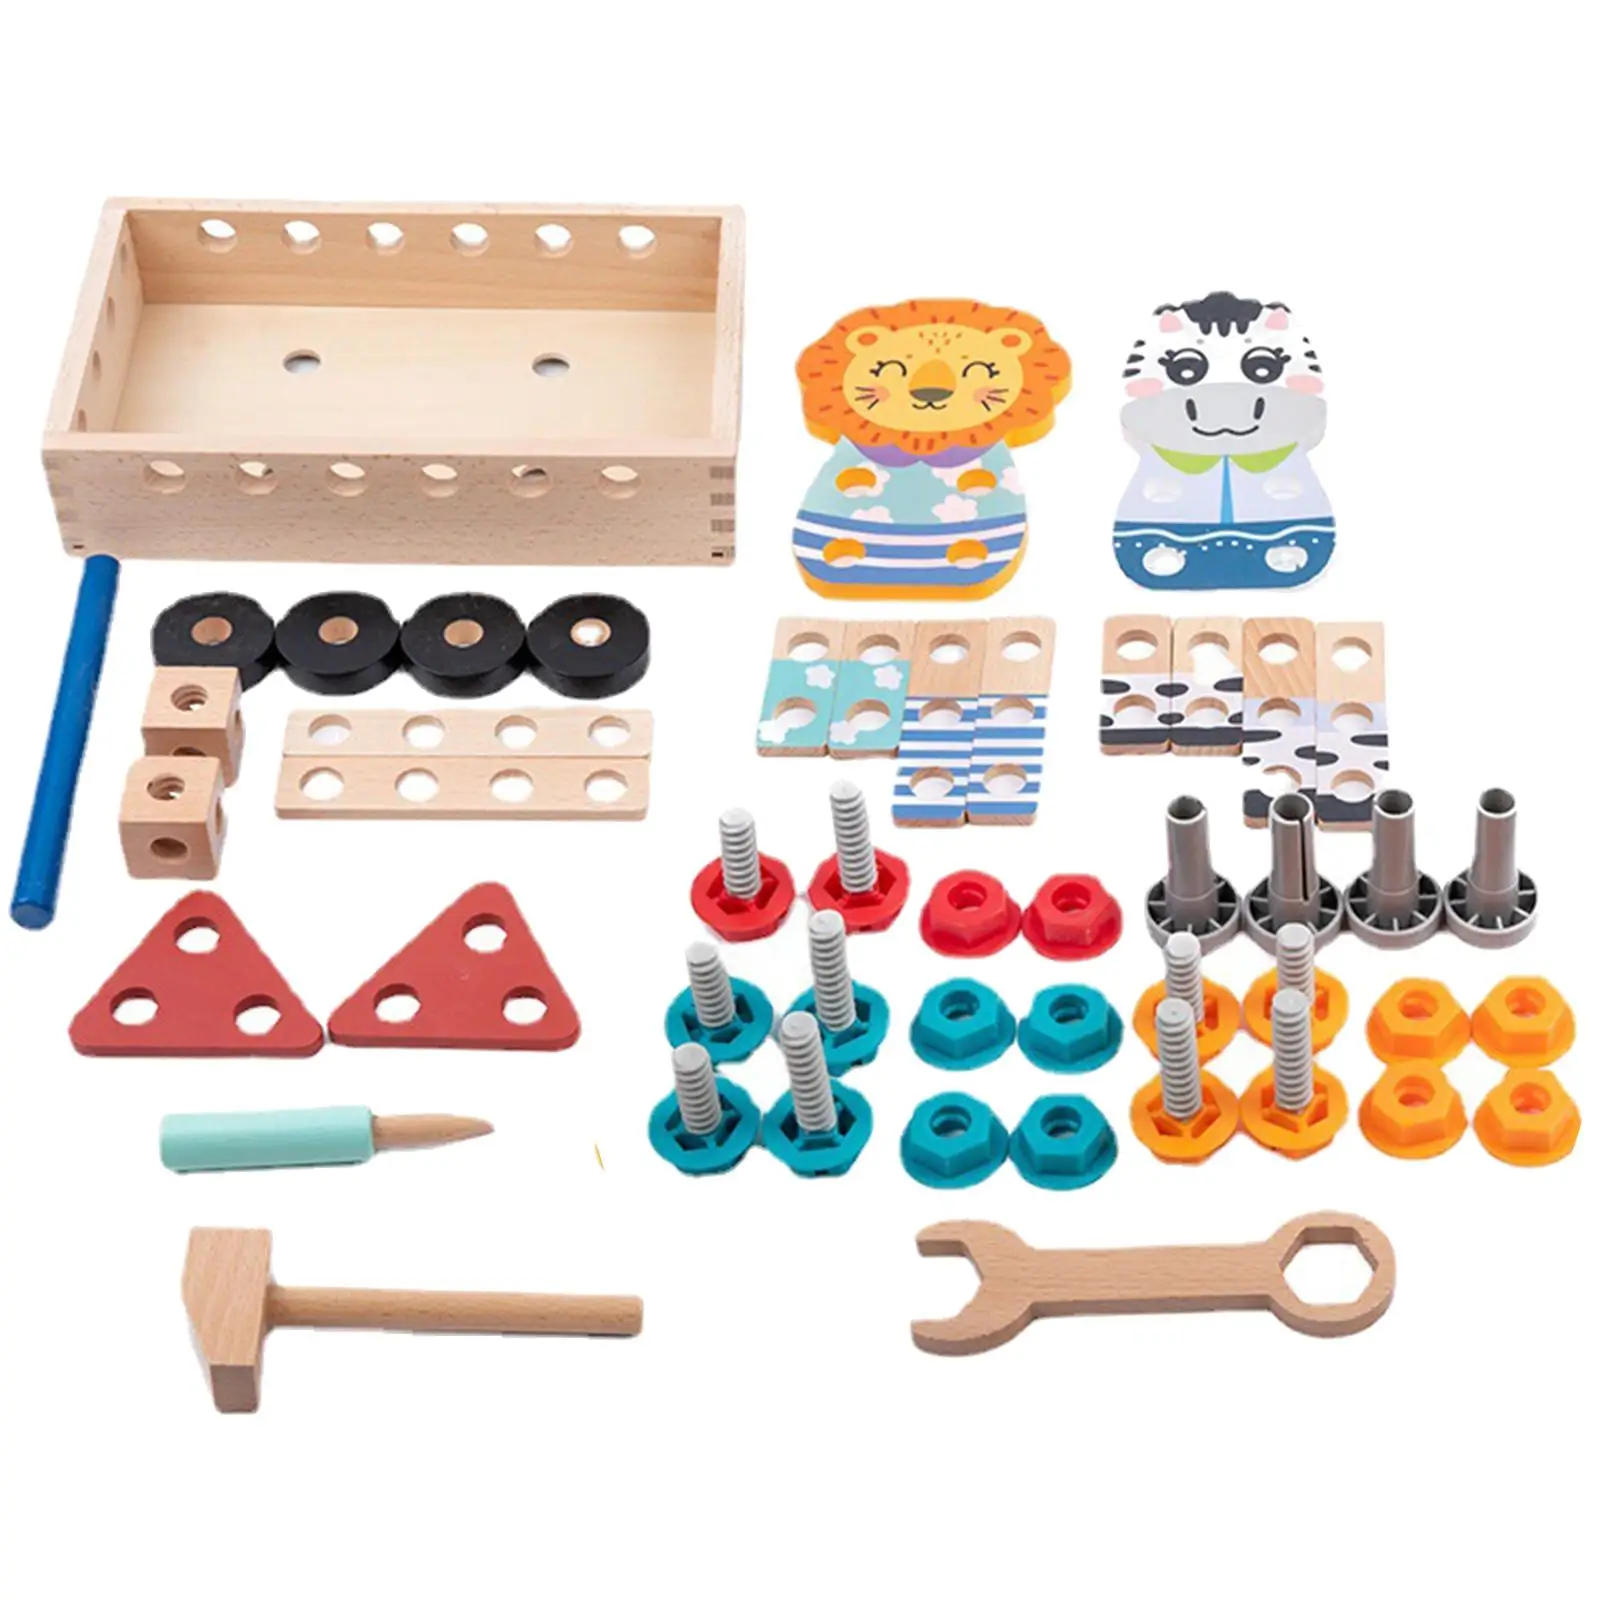 Toddler Tool Set DIY Construction Toy for Education Learning Education